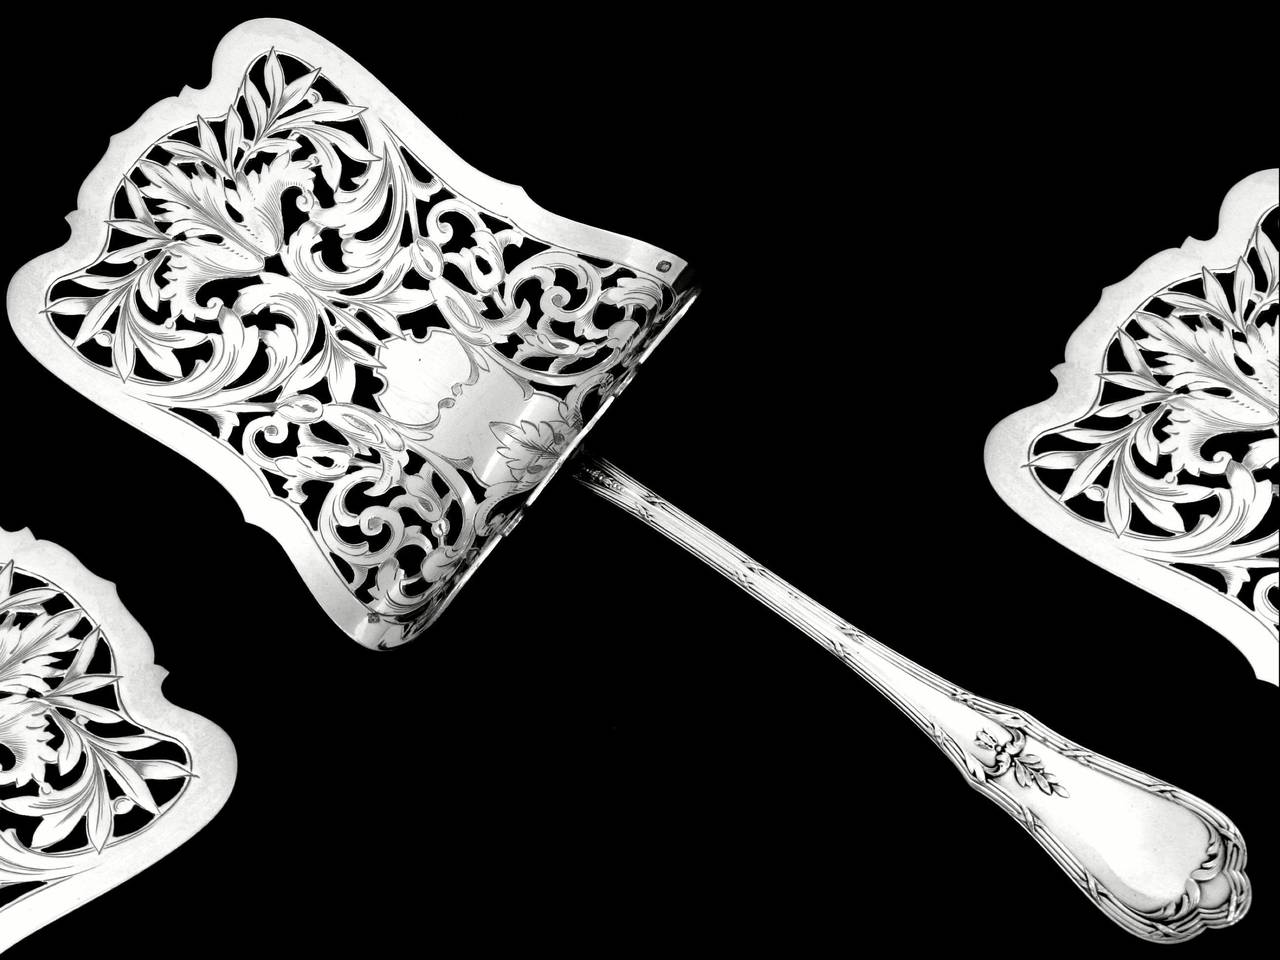 Neoclassical Coignet French All Sterling Silver Asparagus Pastry Server Louis XVI Pattern For Sale